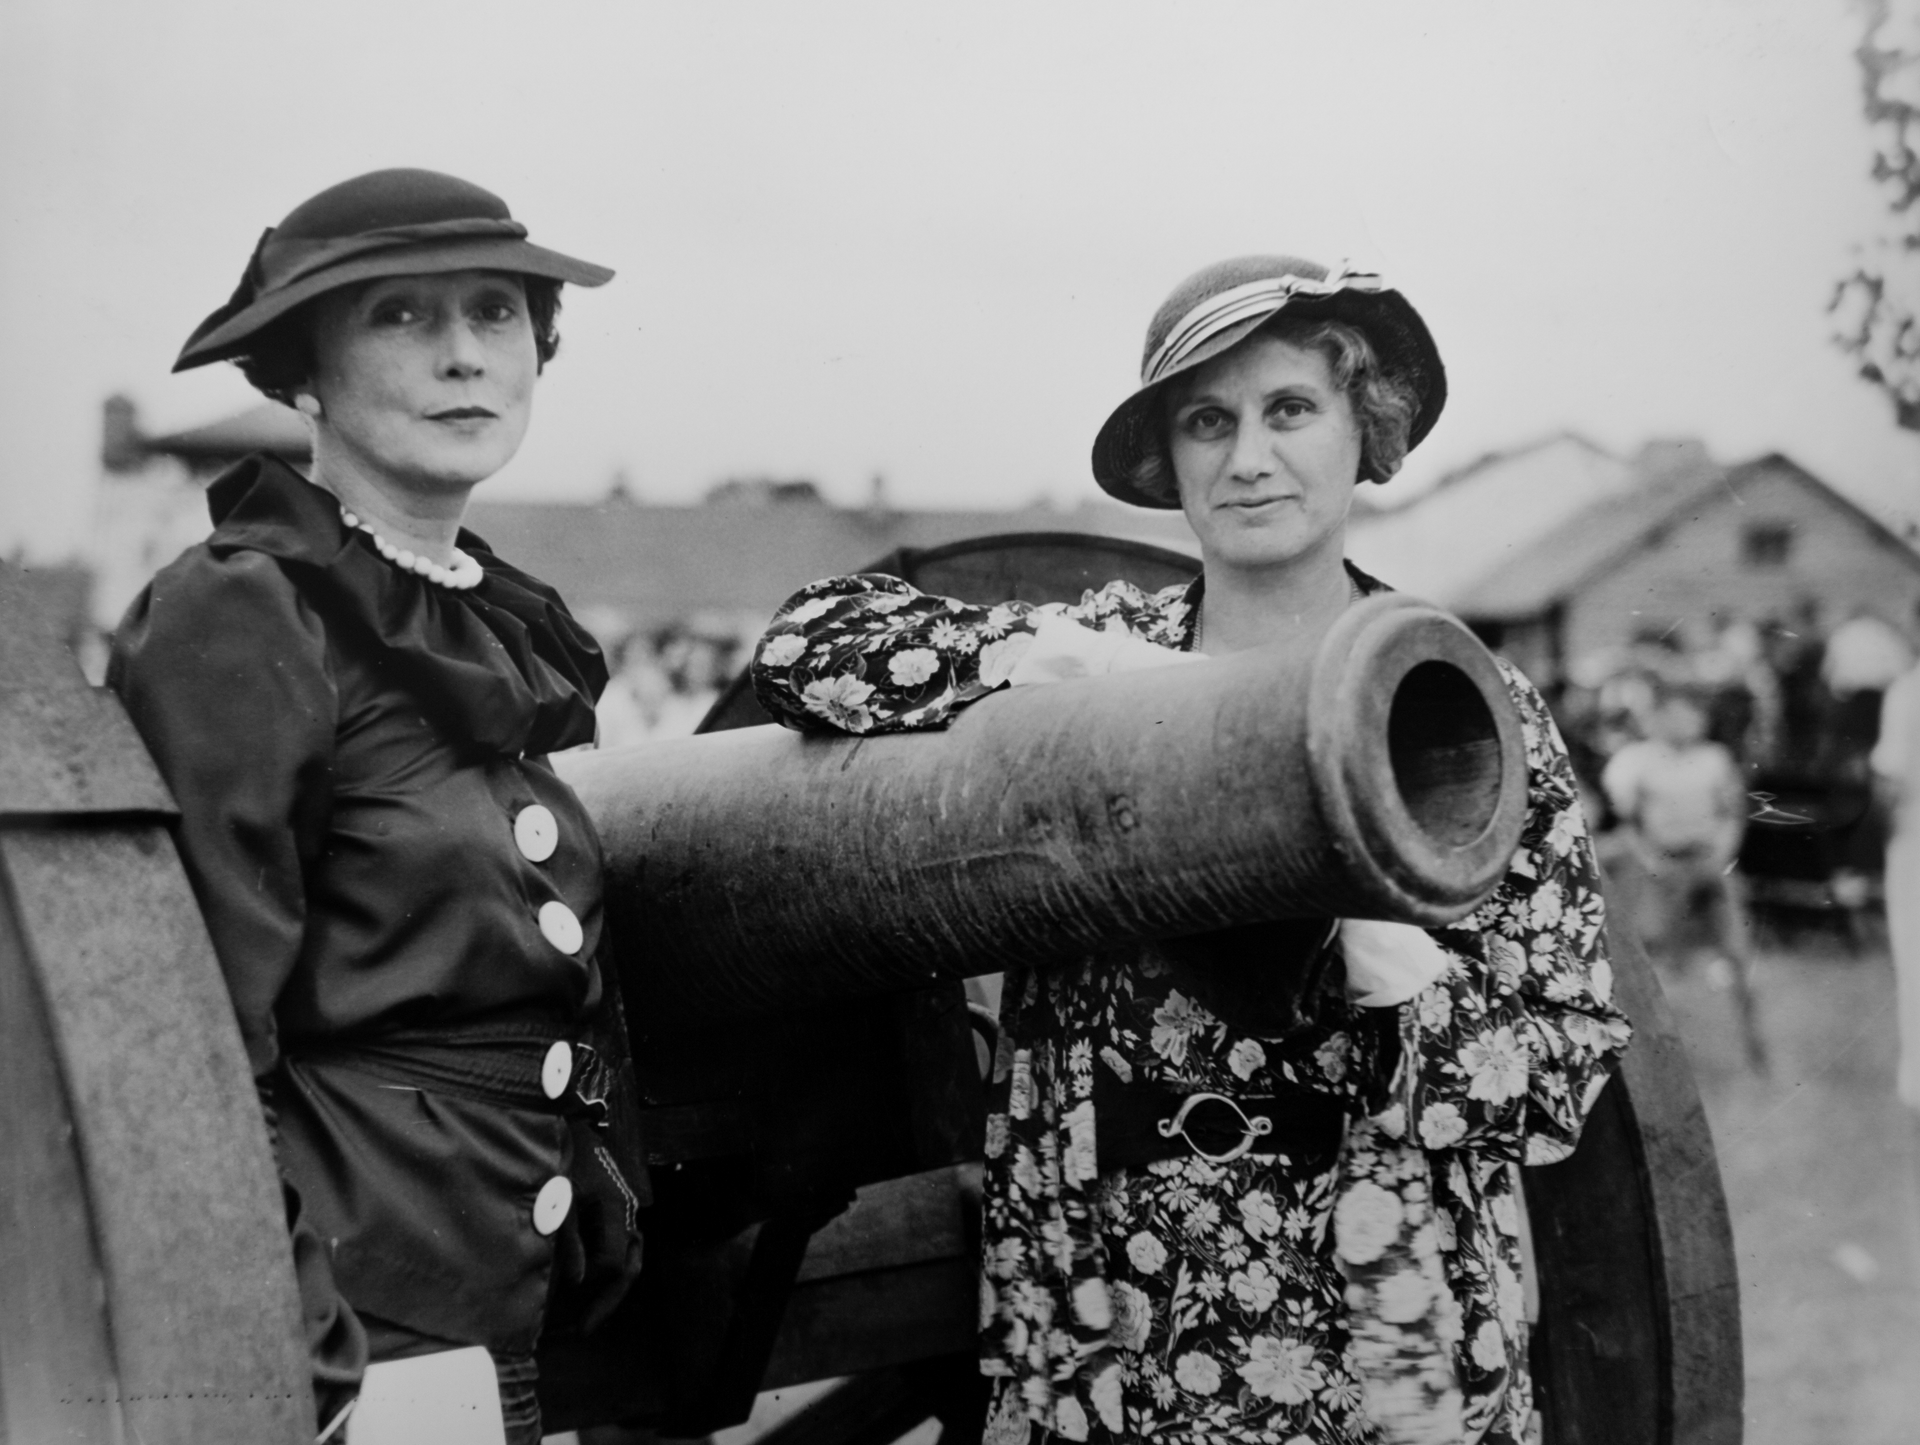 Two women standing next to a cannon in a black and white photo